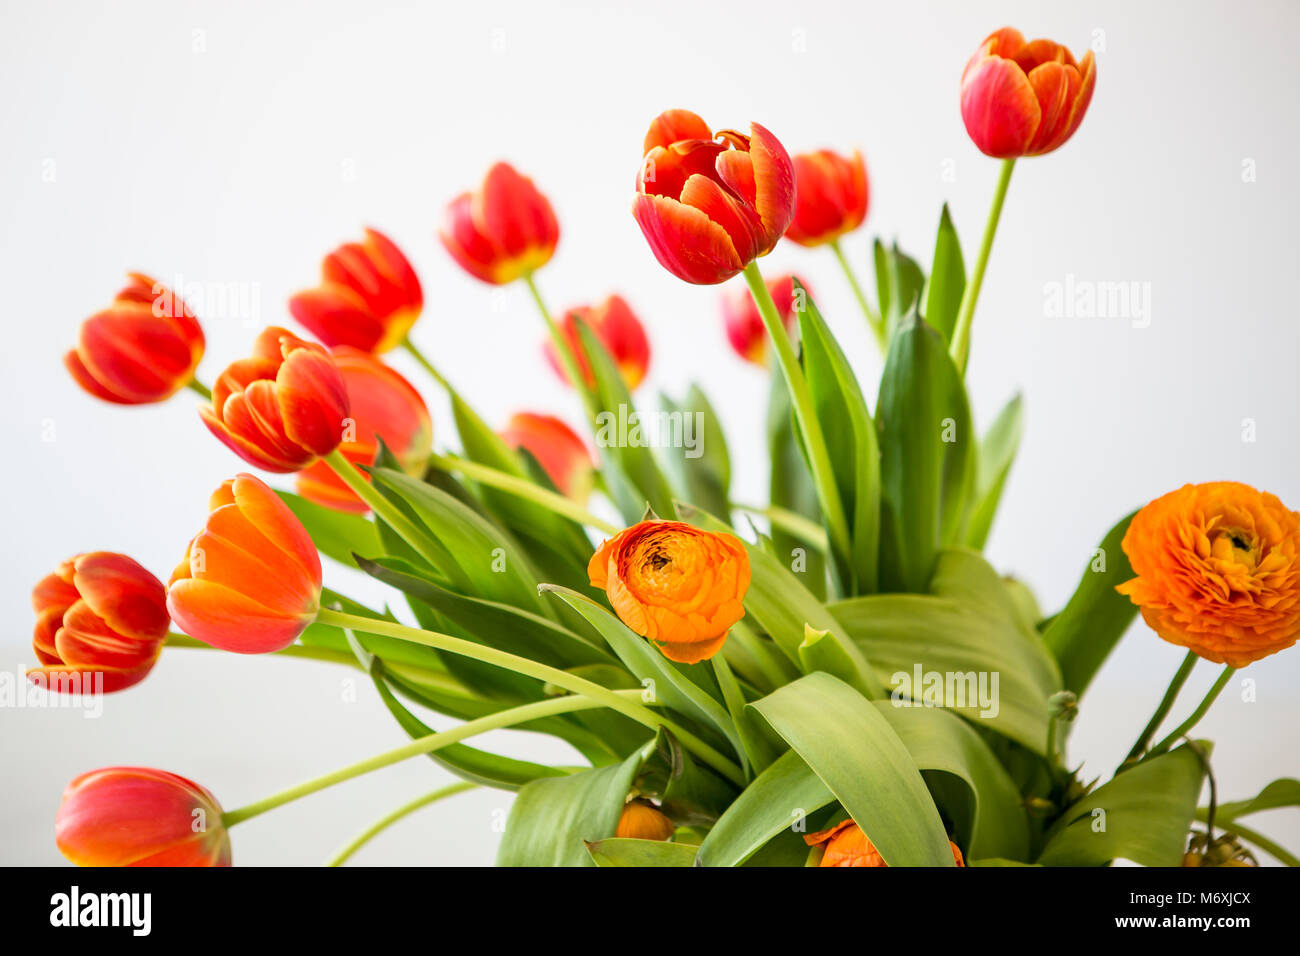 Withering orange and yellow tulips in a vase. Some leafes are lost. Stock Photo